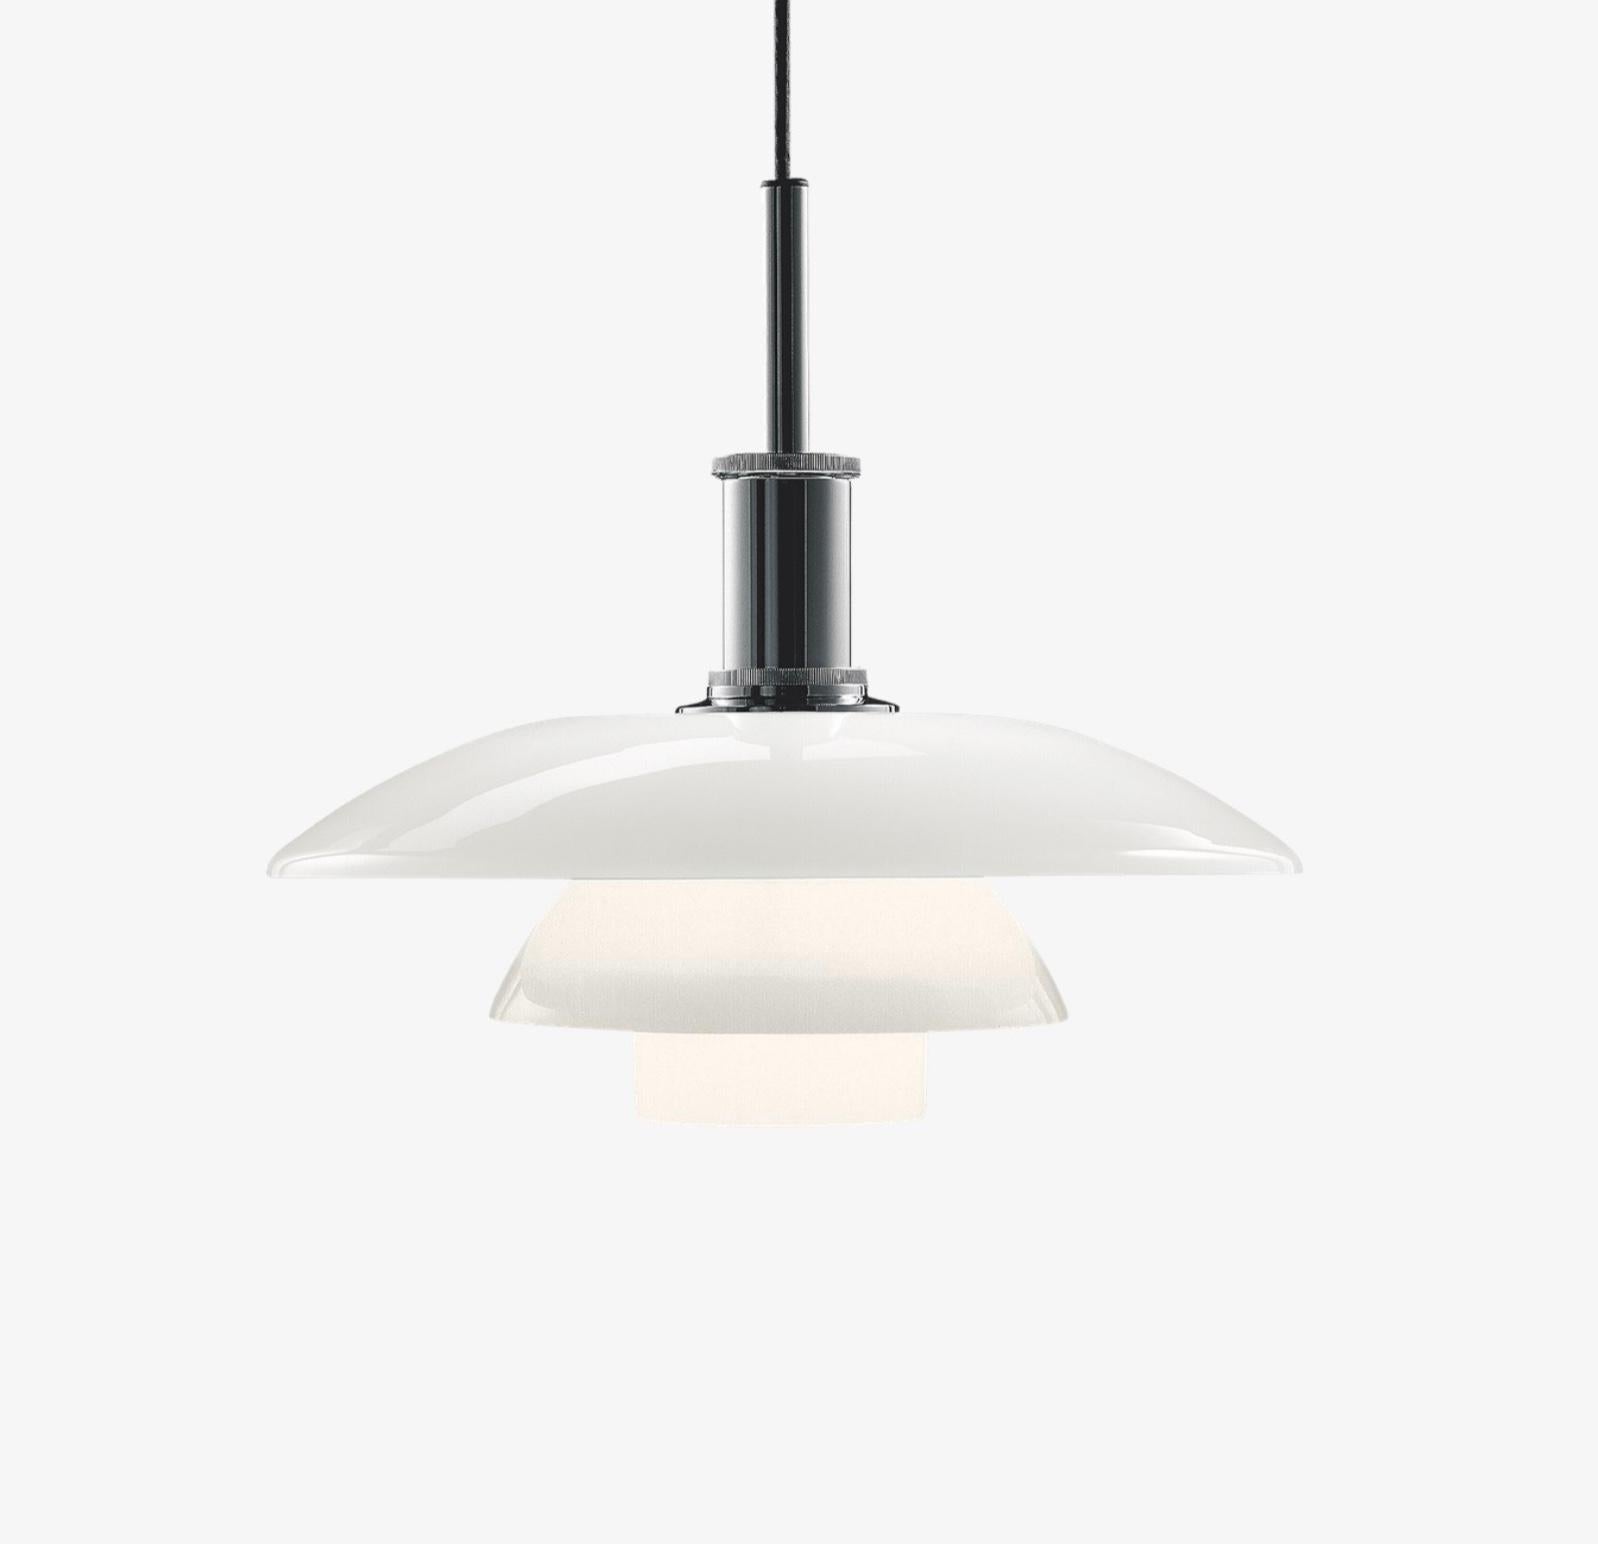 Poul Henningsen 'PH 4½-4' glass pendant for Louis Poulsen.

Poul Henningsen designed the three-shade system back in 1925-1926. The first lights using the system were designed by PH in cooperation with Louis Poulsen for an exhibition in Paris. This